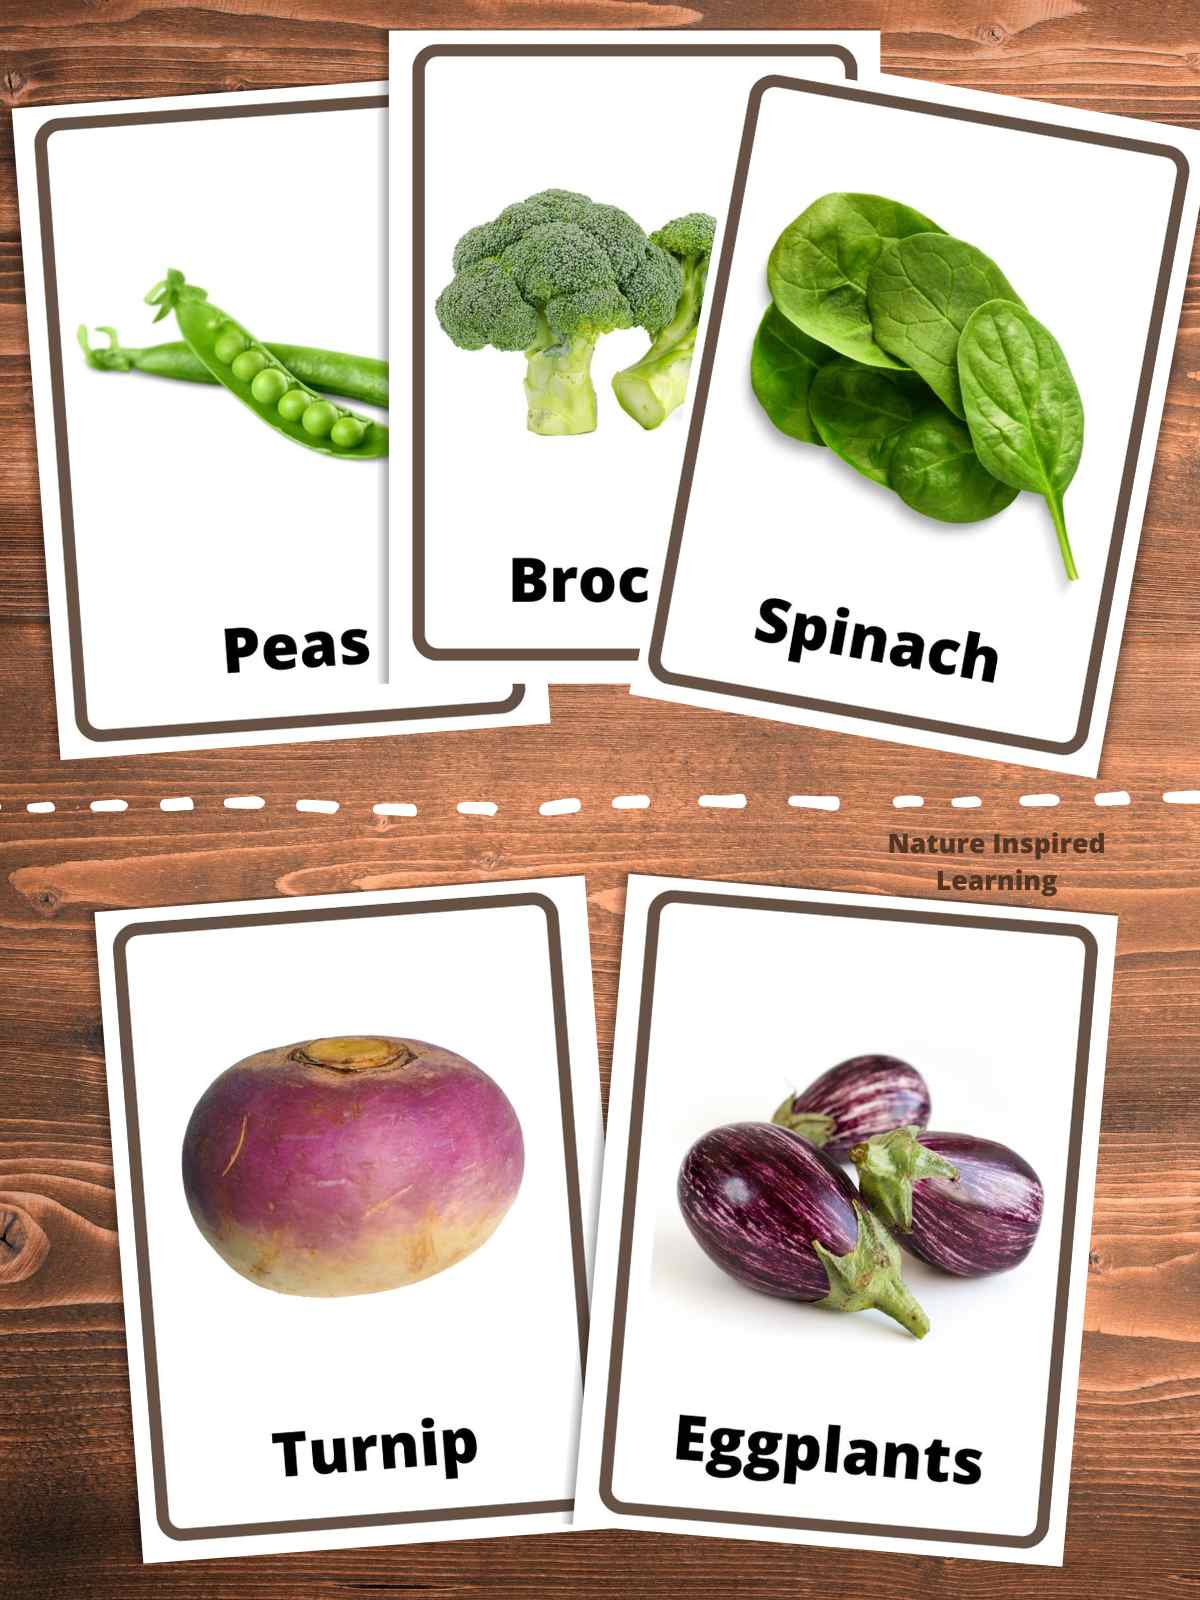 three vegetable flashcards with green veggies: peas, broccoli, and spinach above two purple veggie flashcards with turnip and eggplants.